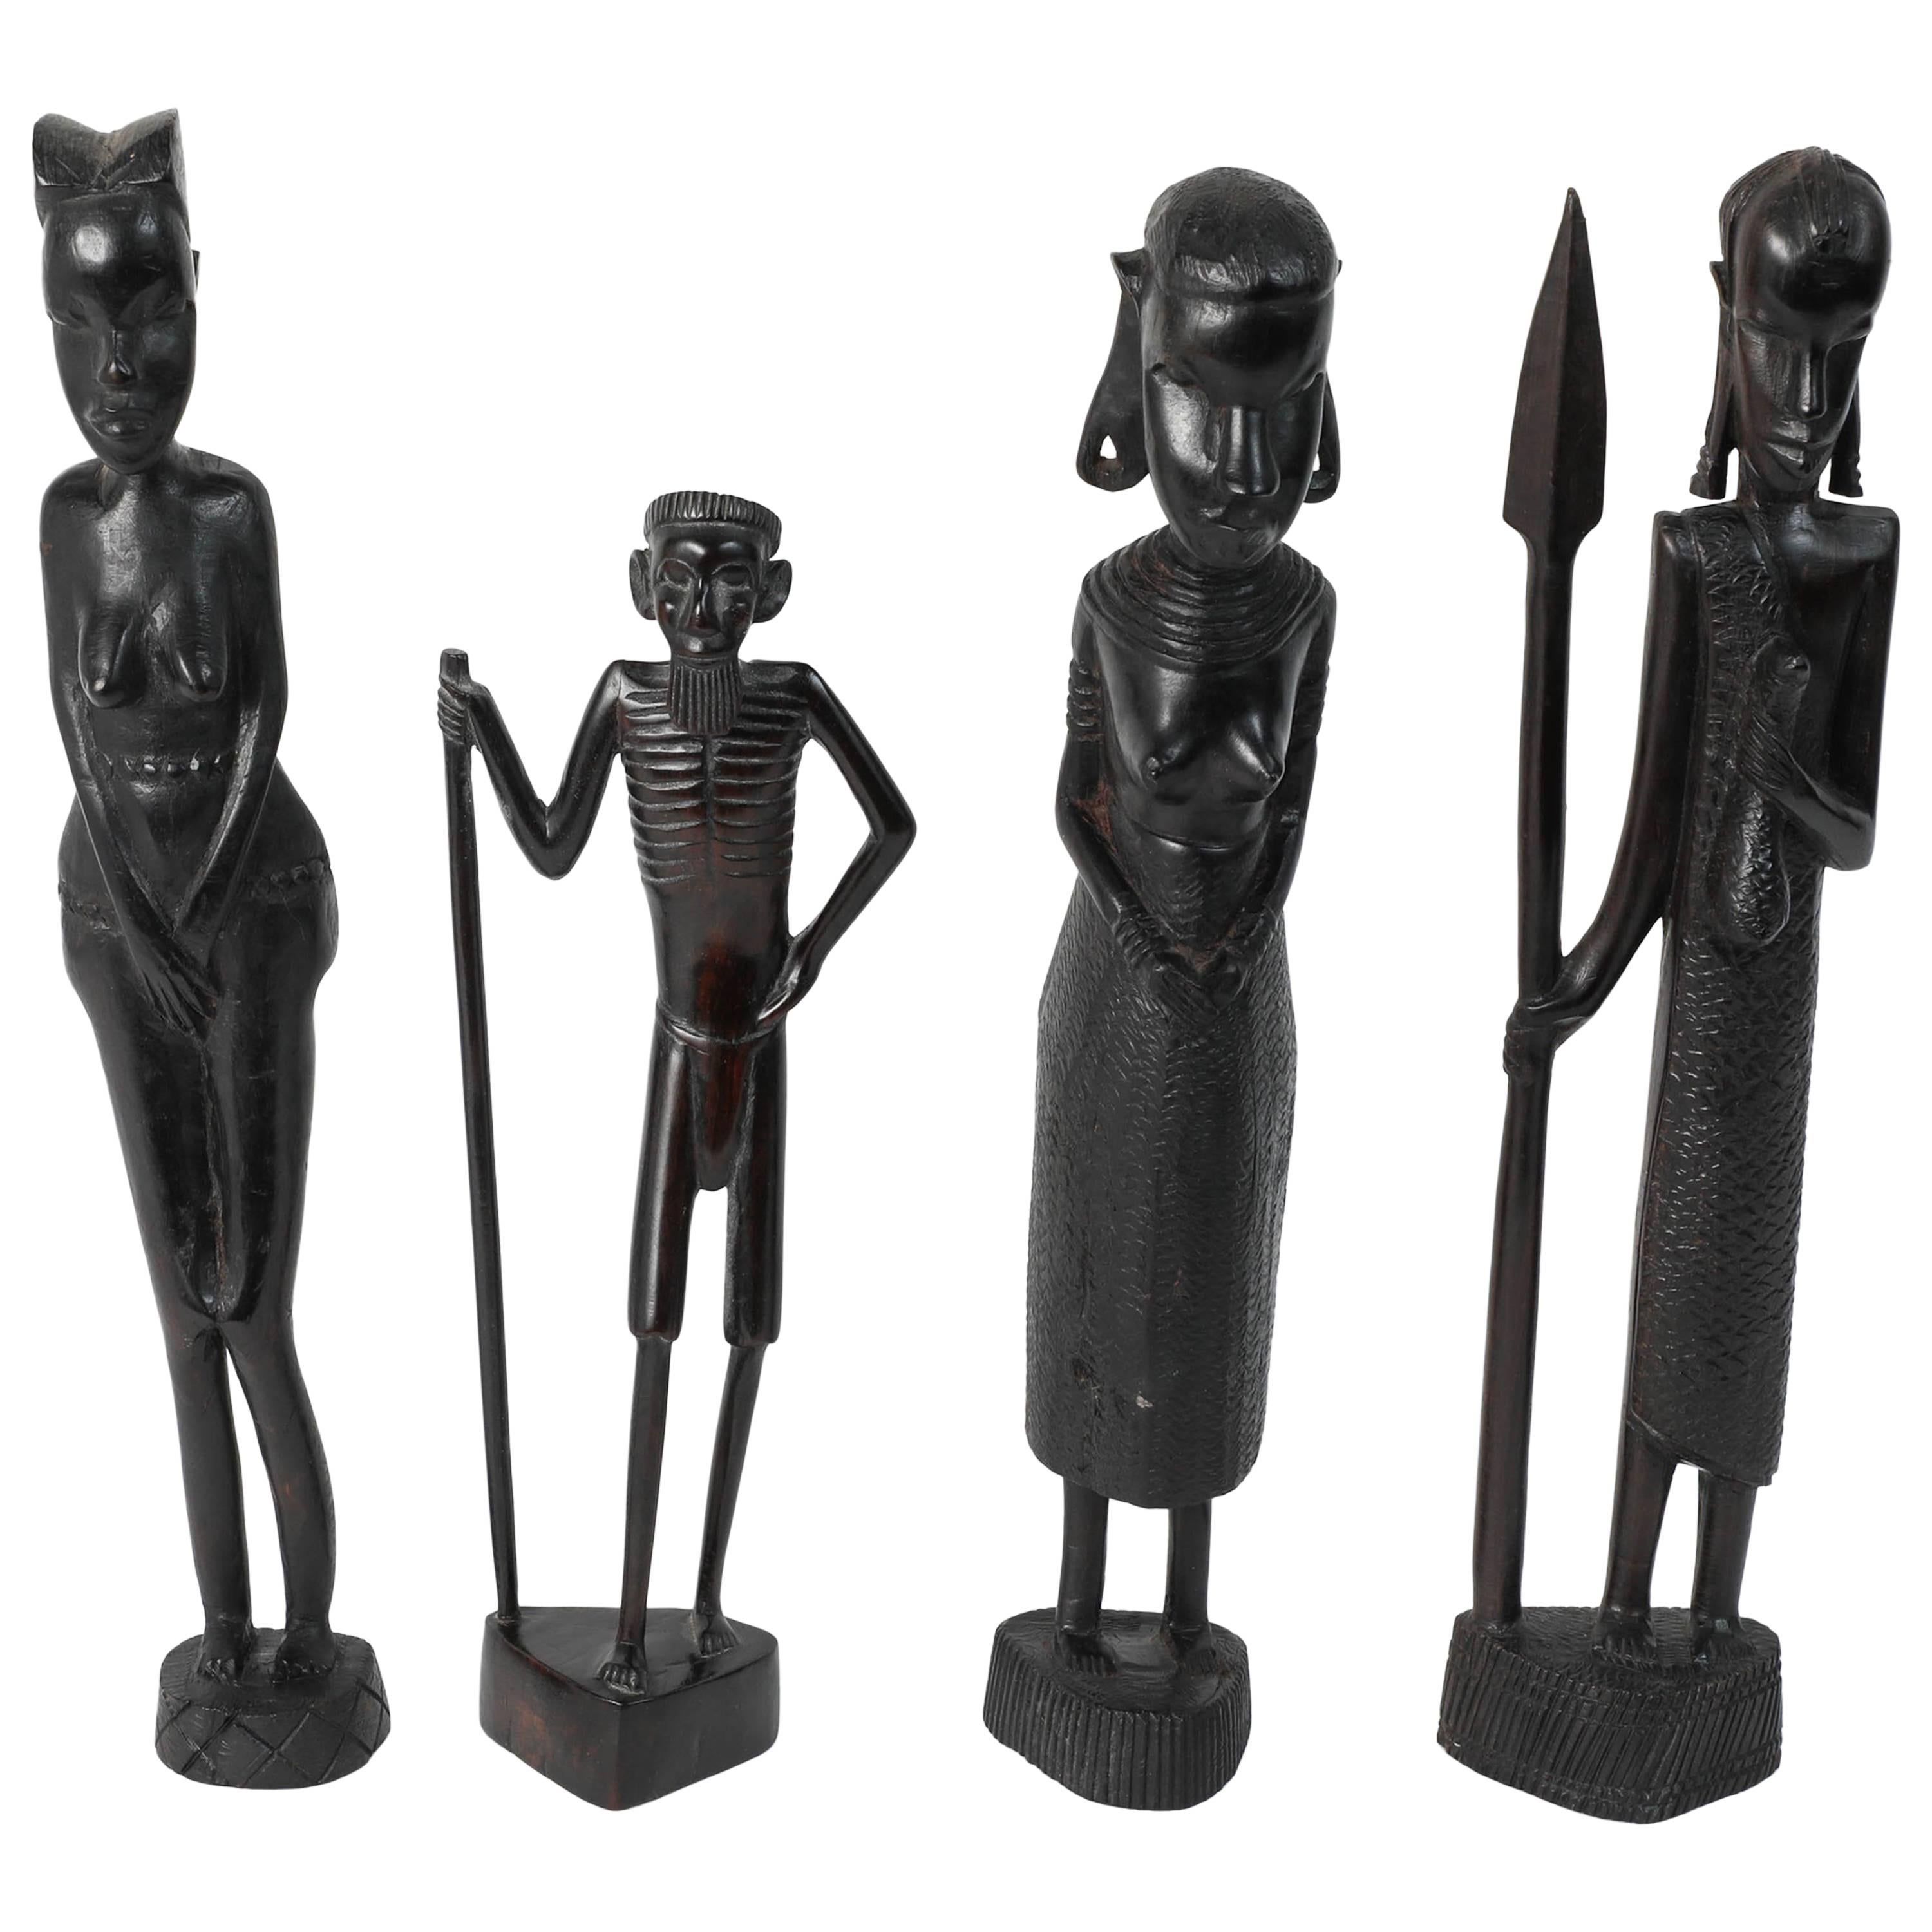 Decorative Hand-Carved African Set of Four Statues from Kenya